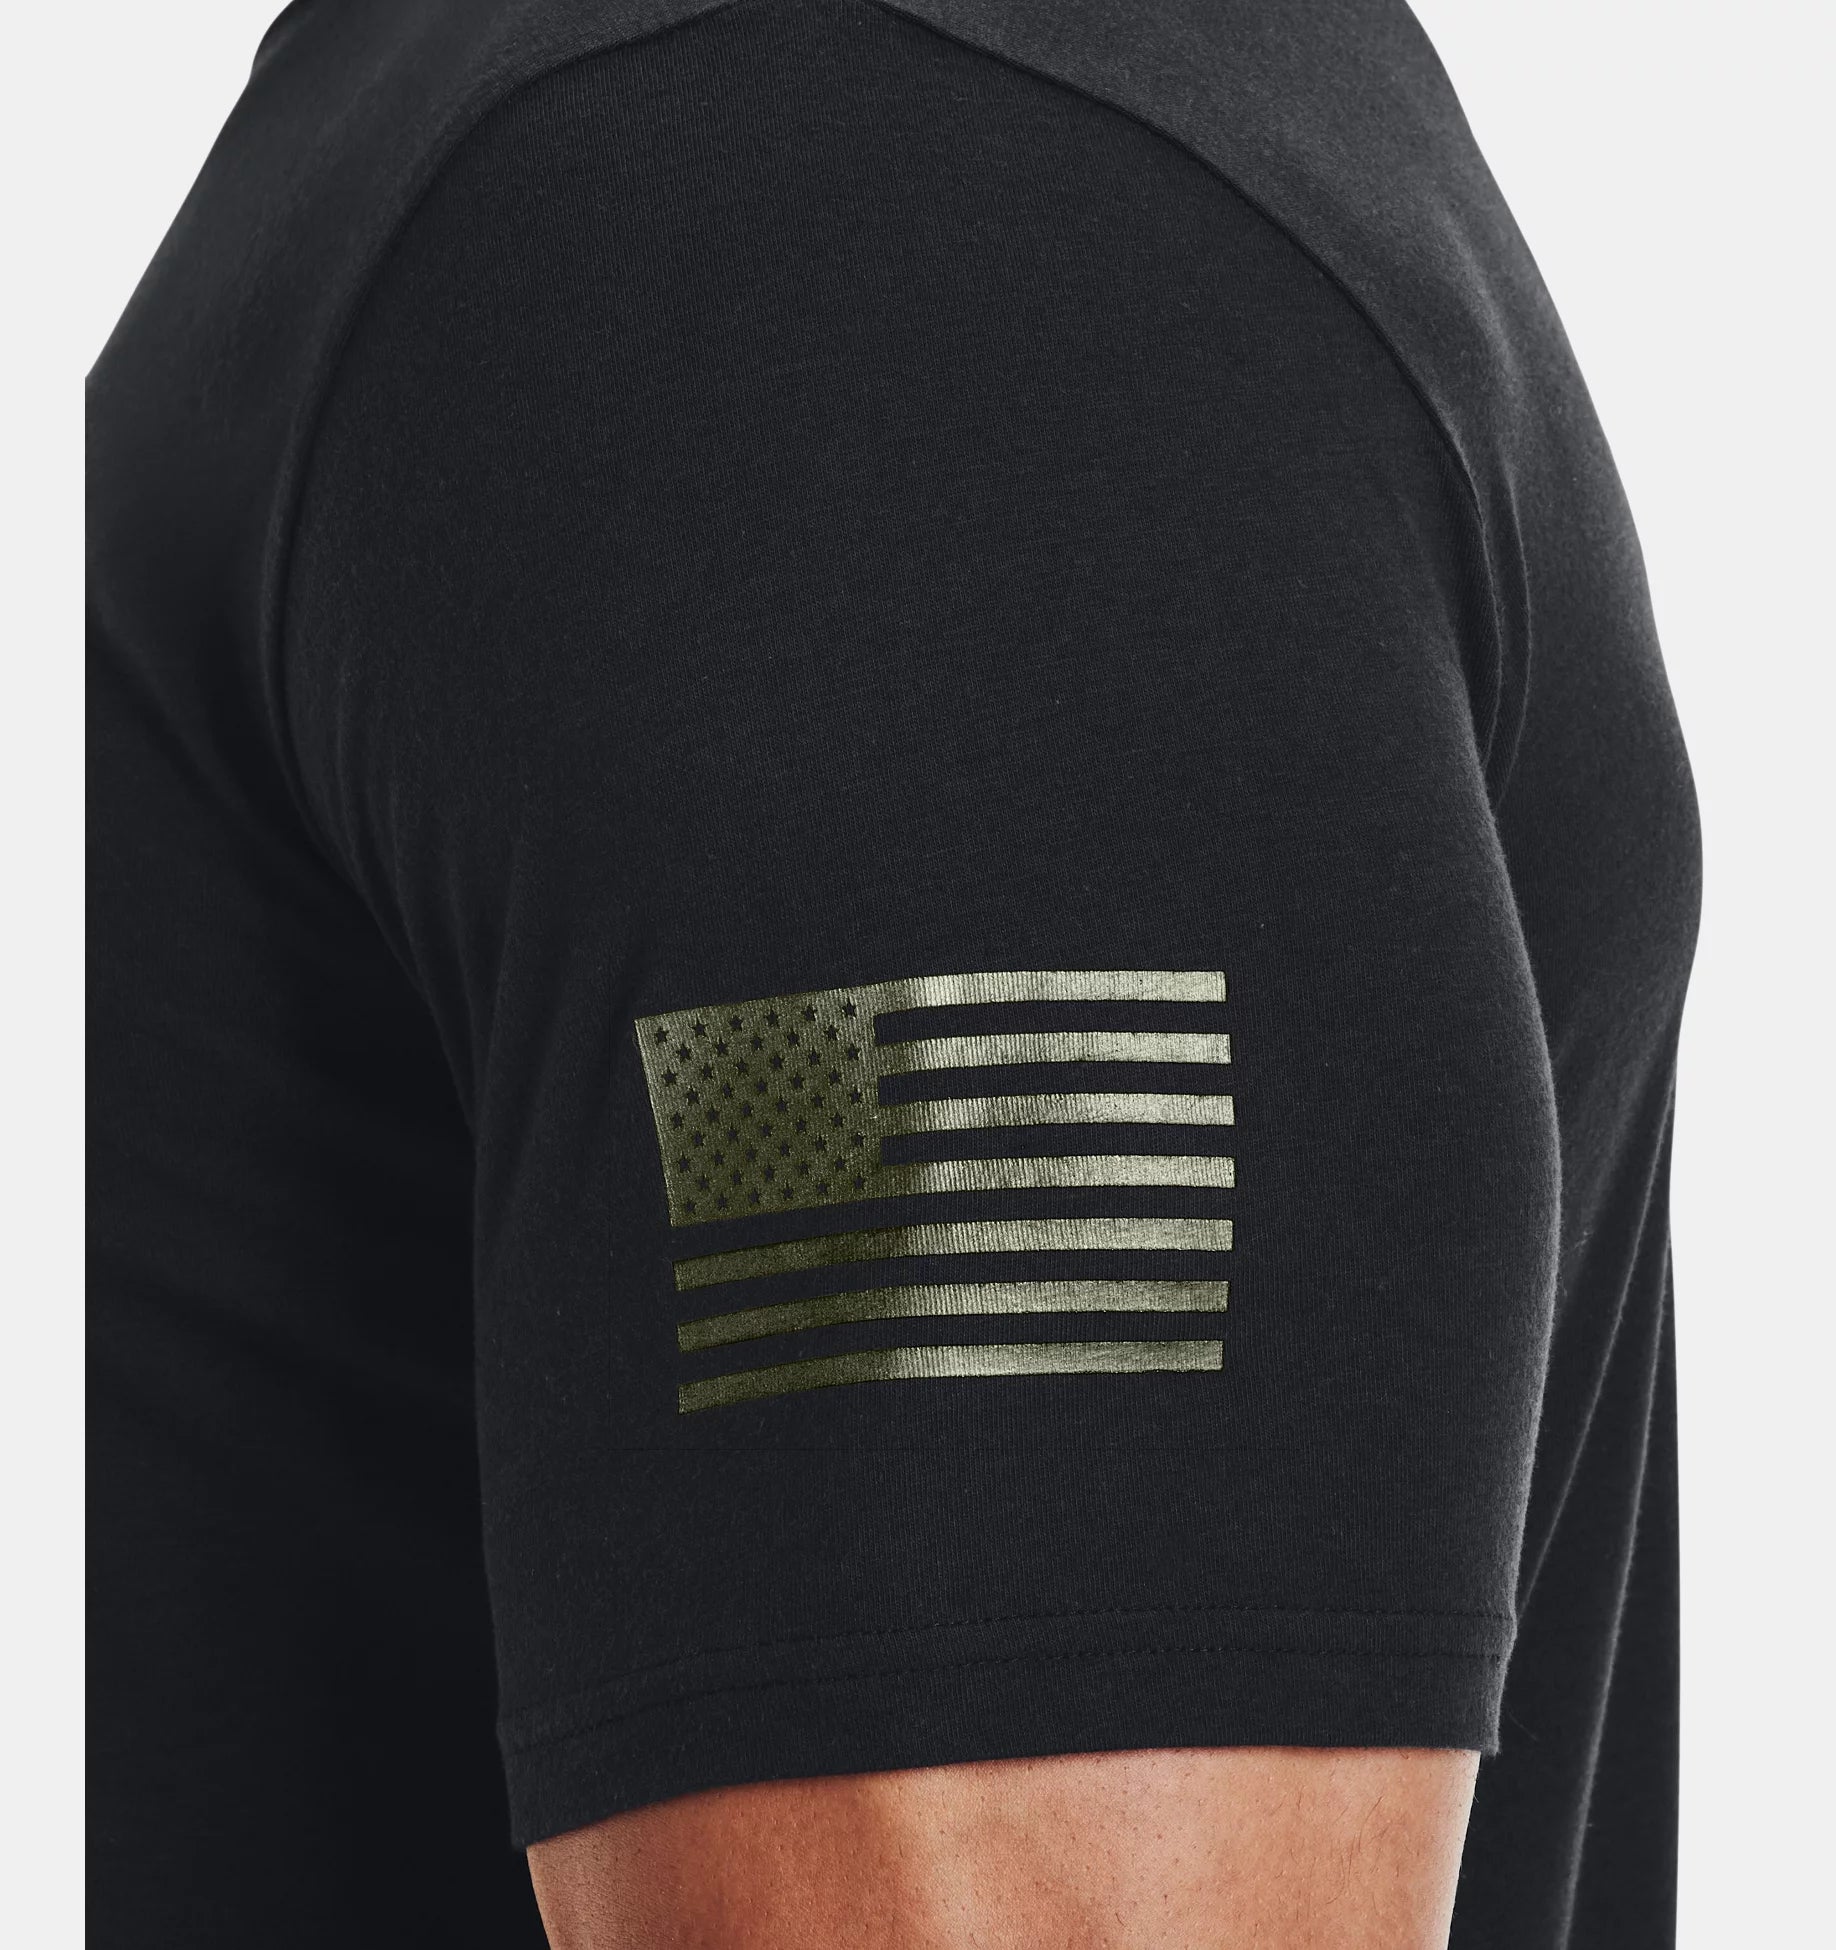  Under Armour 1373889 Men's UA Freedom By 1775 T-Shirt